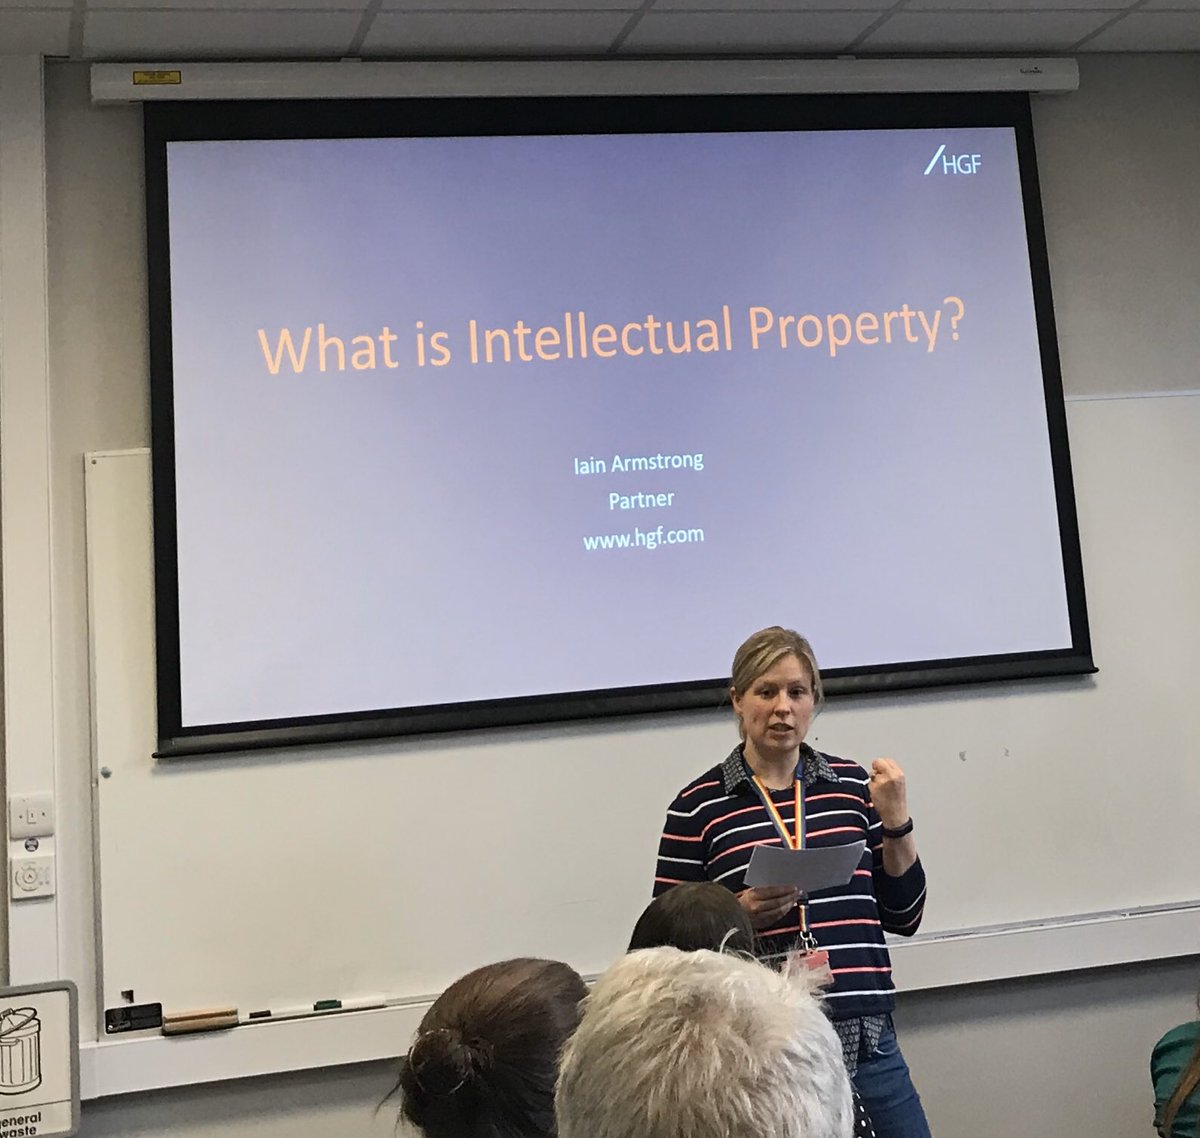 The @LivUniAcademy is at the @UoL_RSA's #lunchandlearn hearing about all things #IP 

Thanks to @njbeesley & Sarah Arrowsmith for organising! #researcherdevelopment #resdev #postdocs